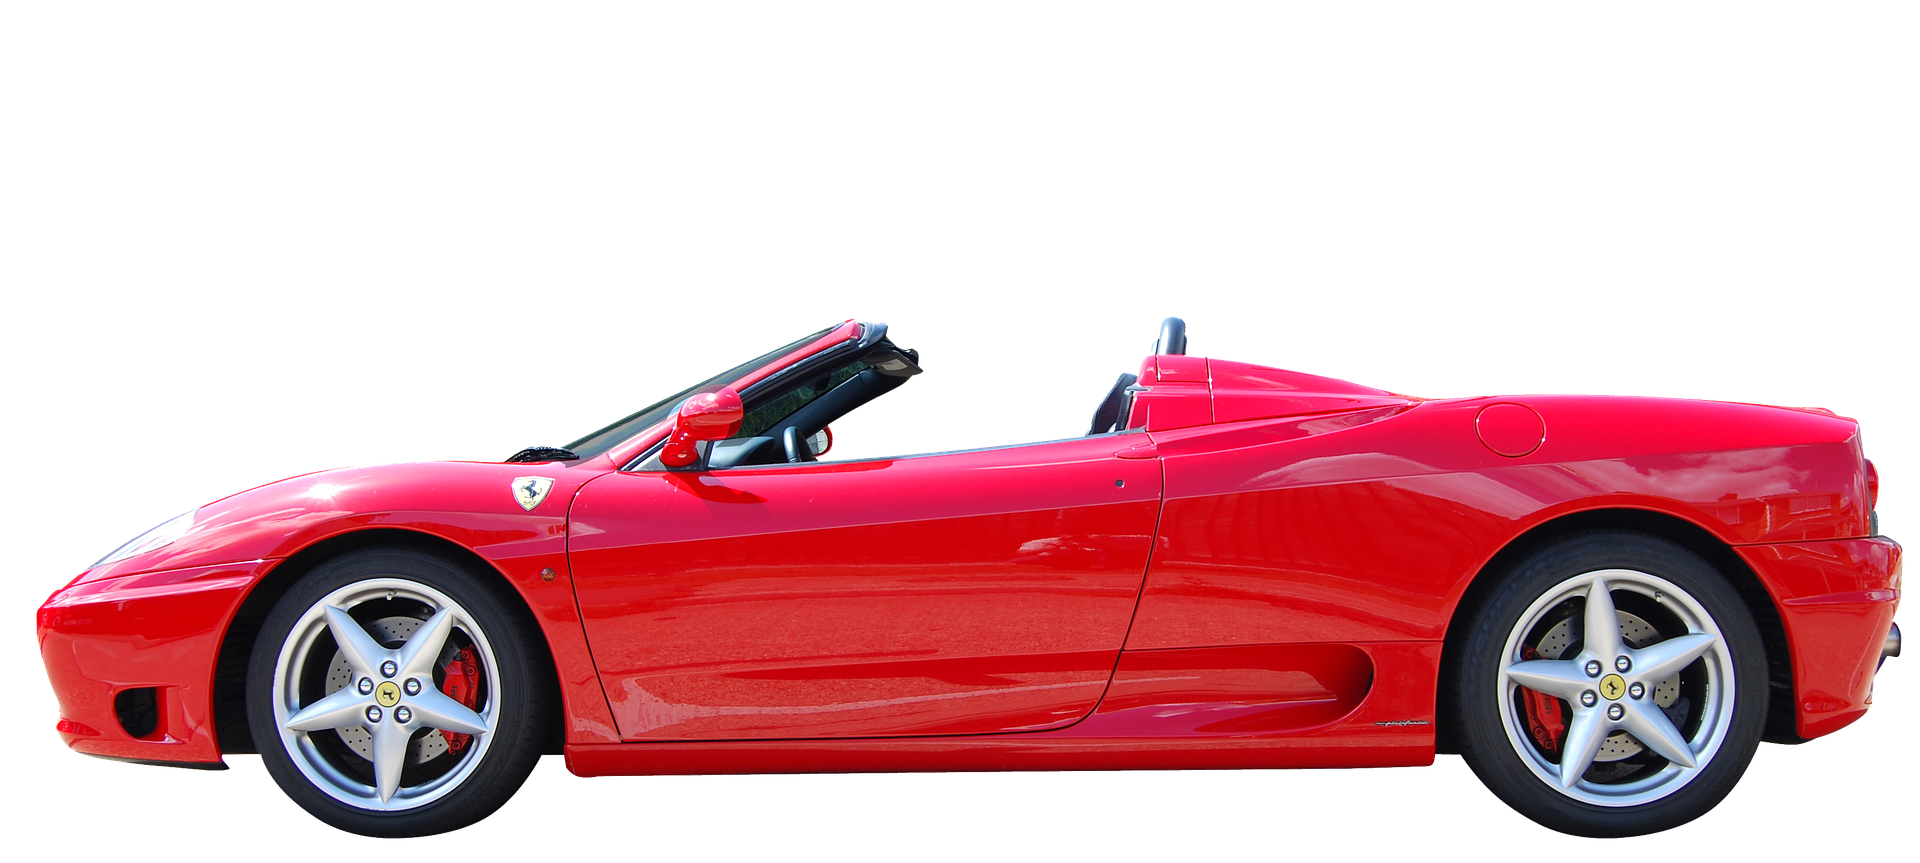 The Blonde In The Red Sports Car A Sexy Birthday Story By White Feather Medium